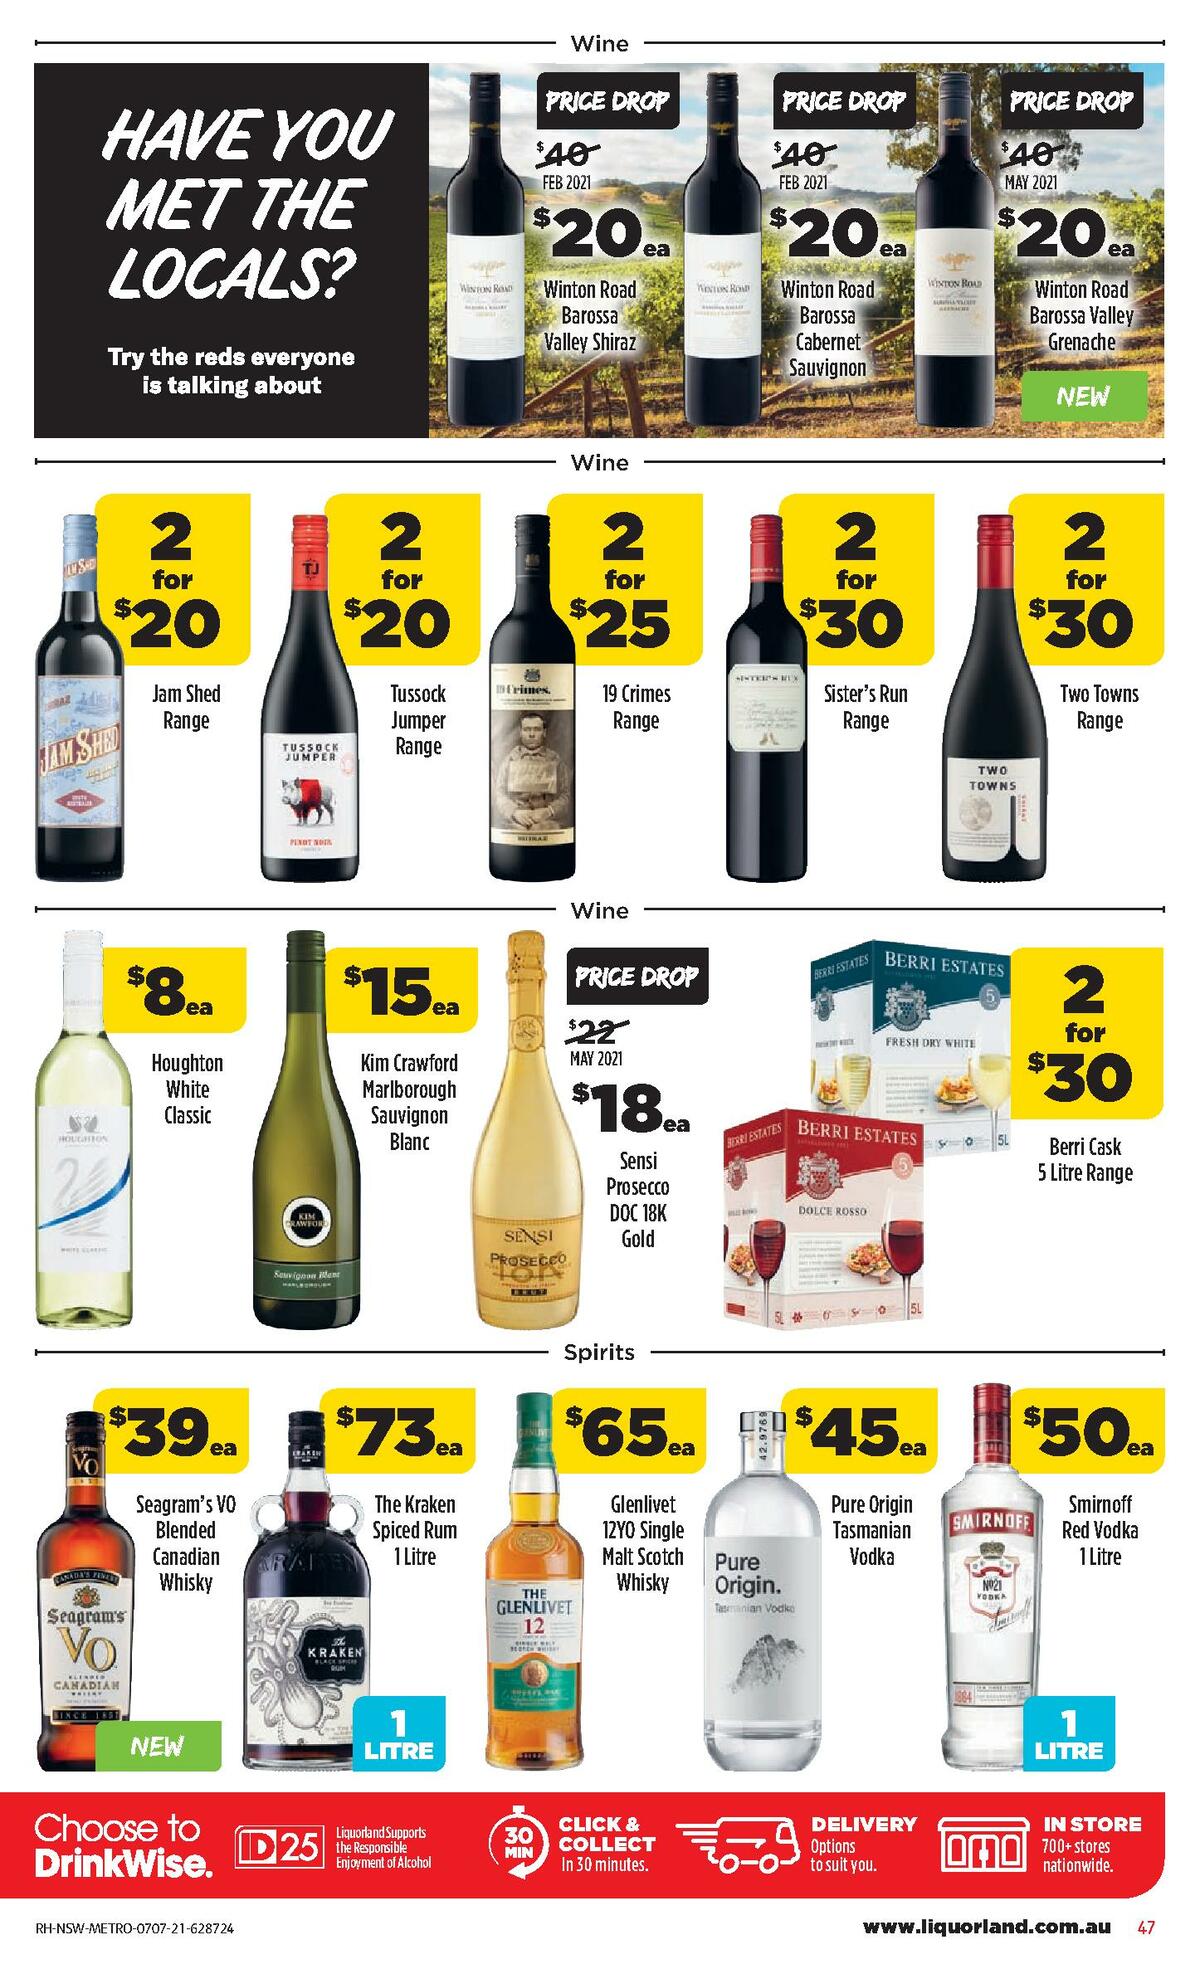 Coles Catalogues from 7 July